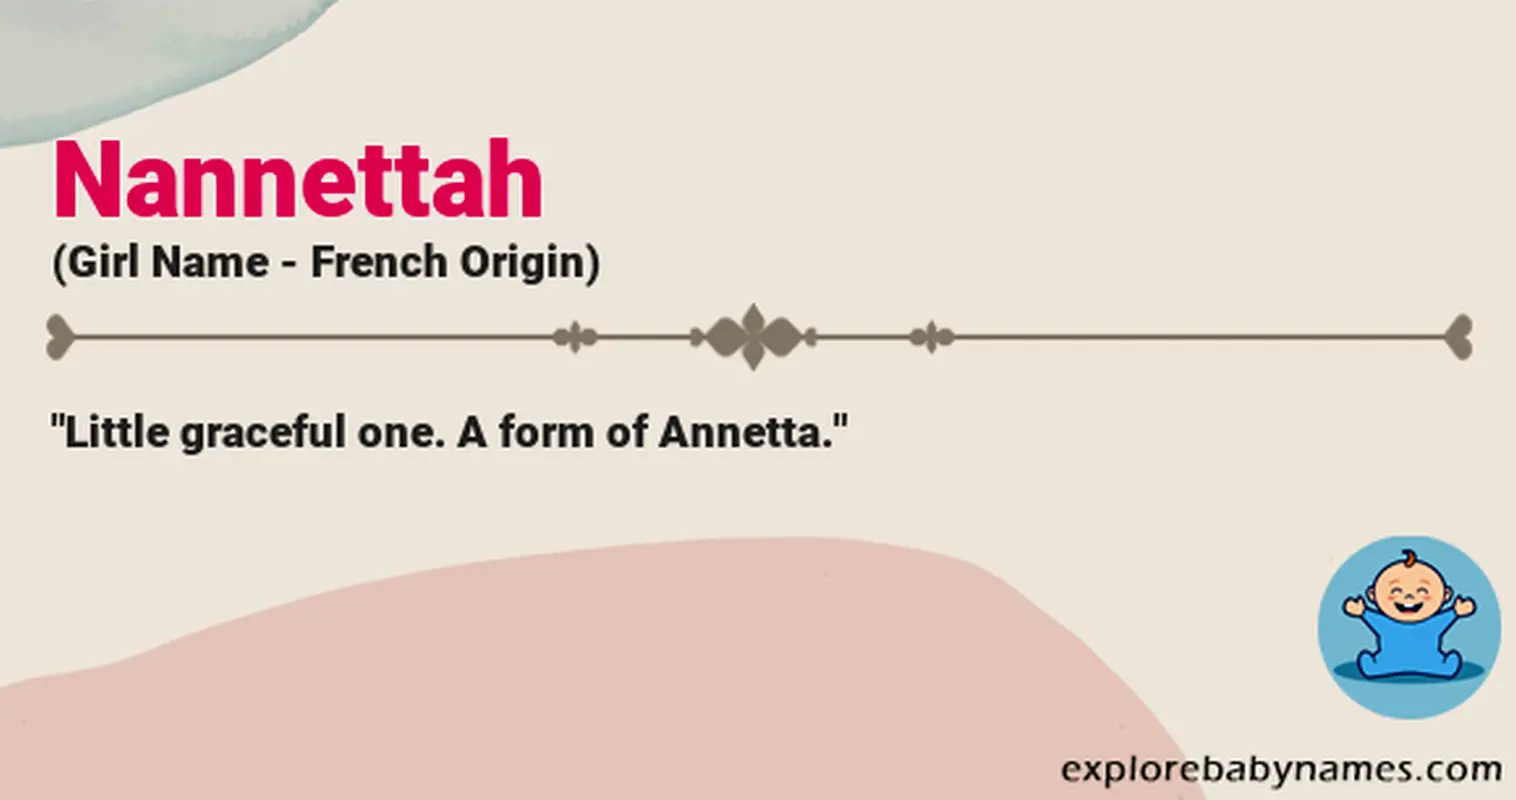 Meaning of Nannettah